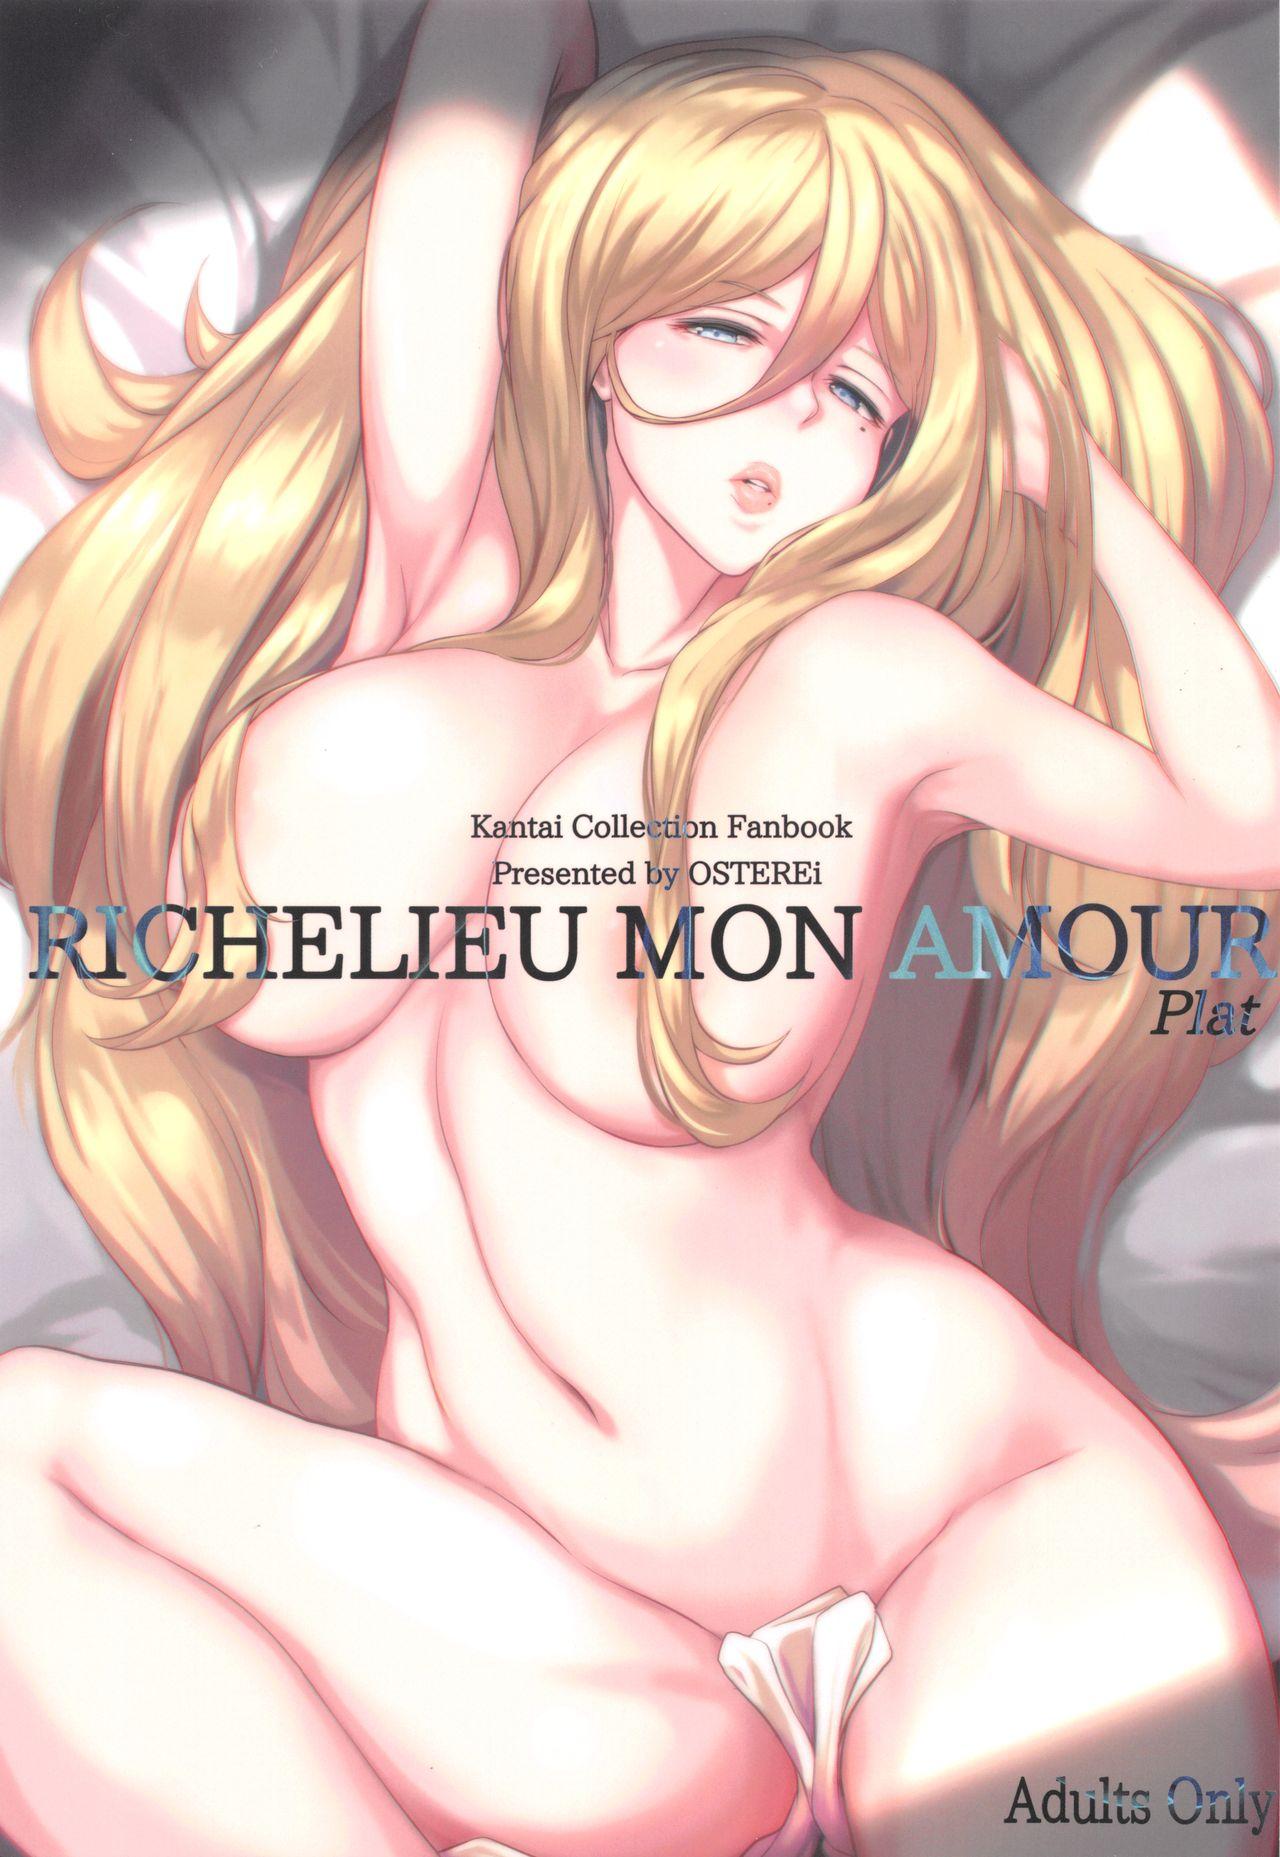 Cocksucking RICHELIEU MON AMOUR Plat - Kantai collection 3some - Picture 1